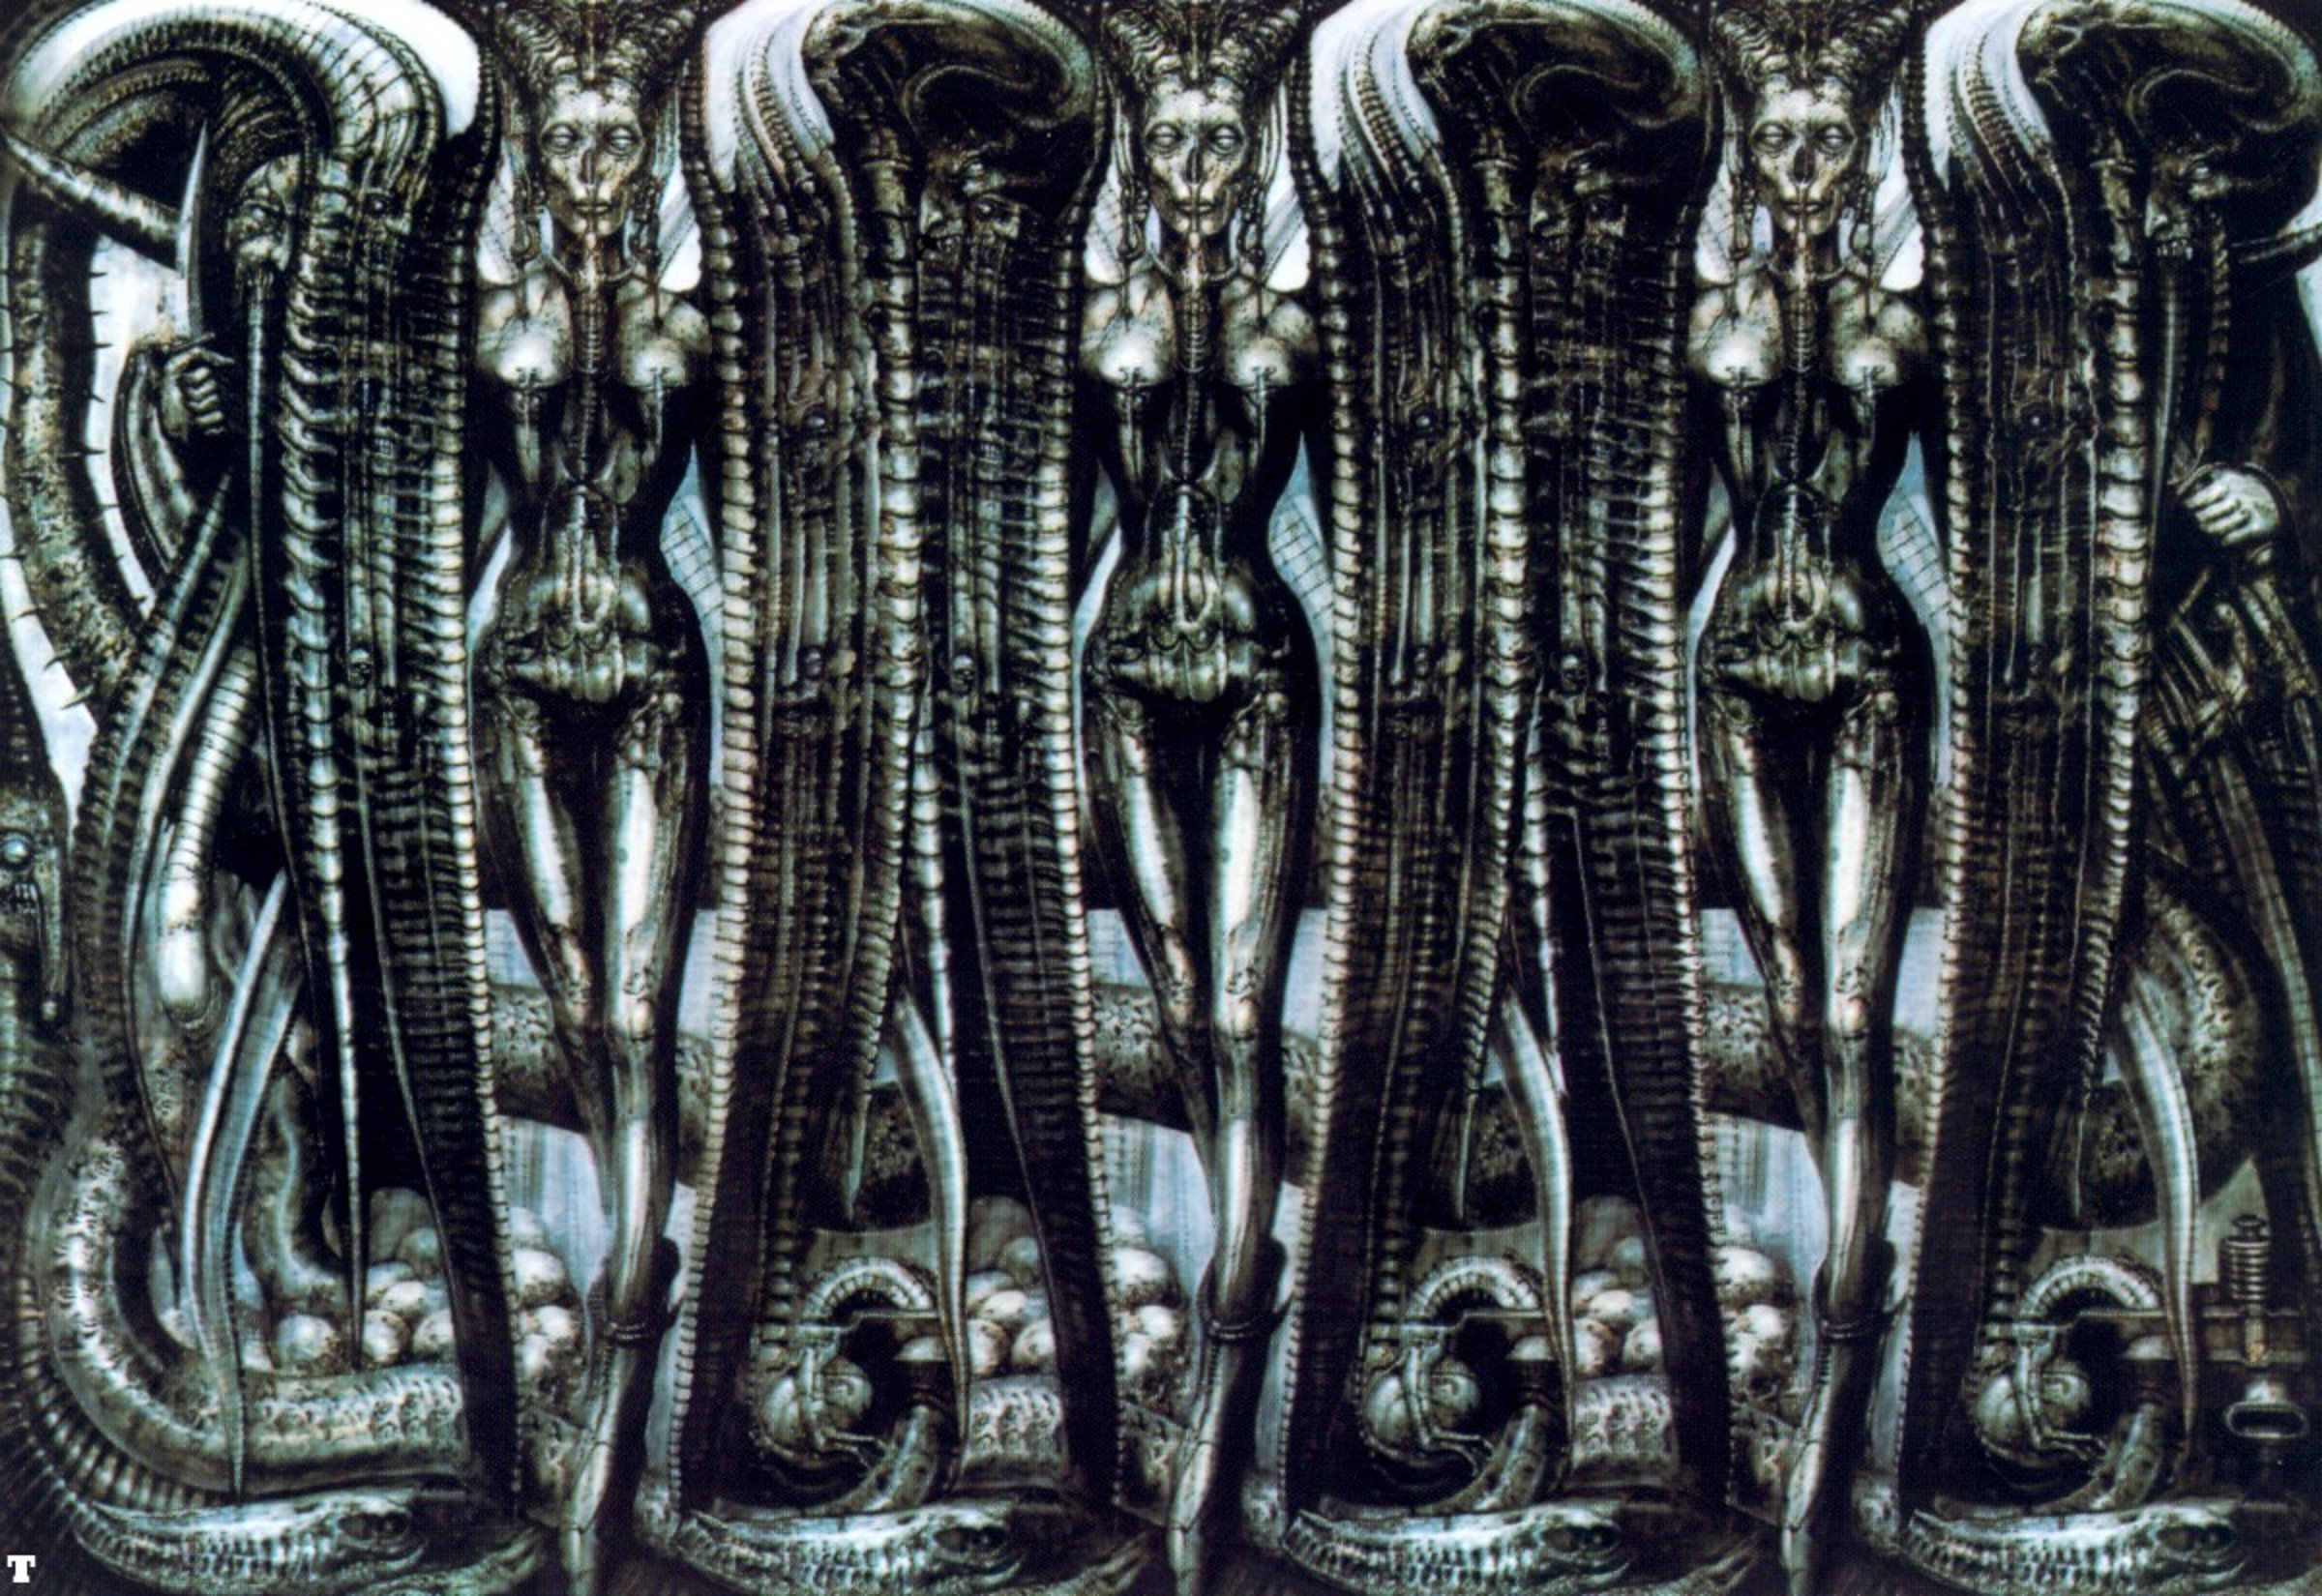 Download hd wallpapers of 625382-h-r-, Giger. 